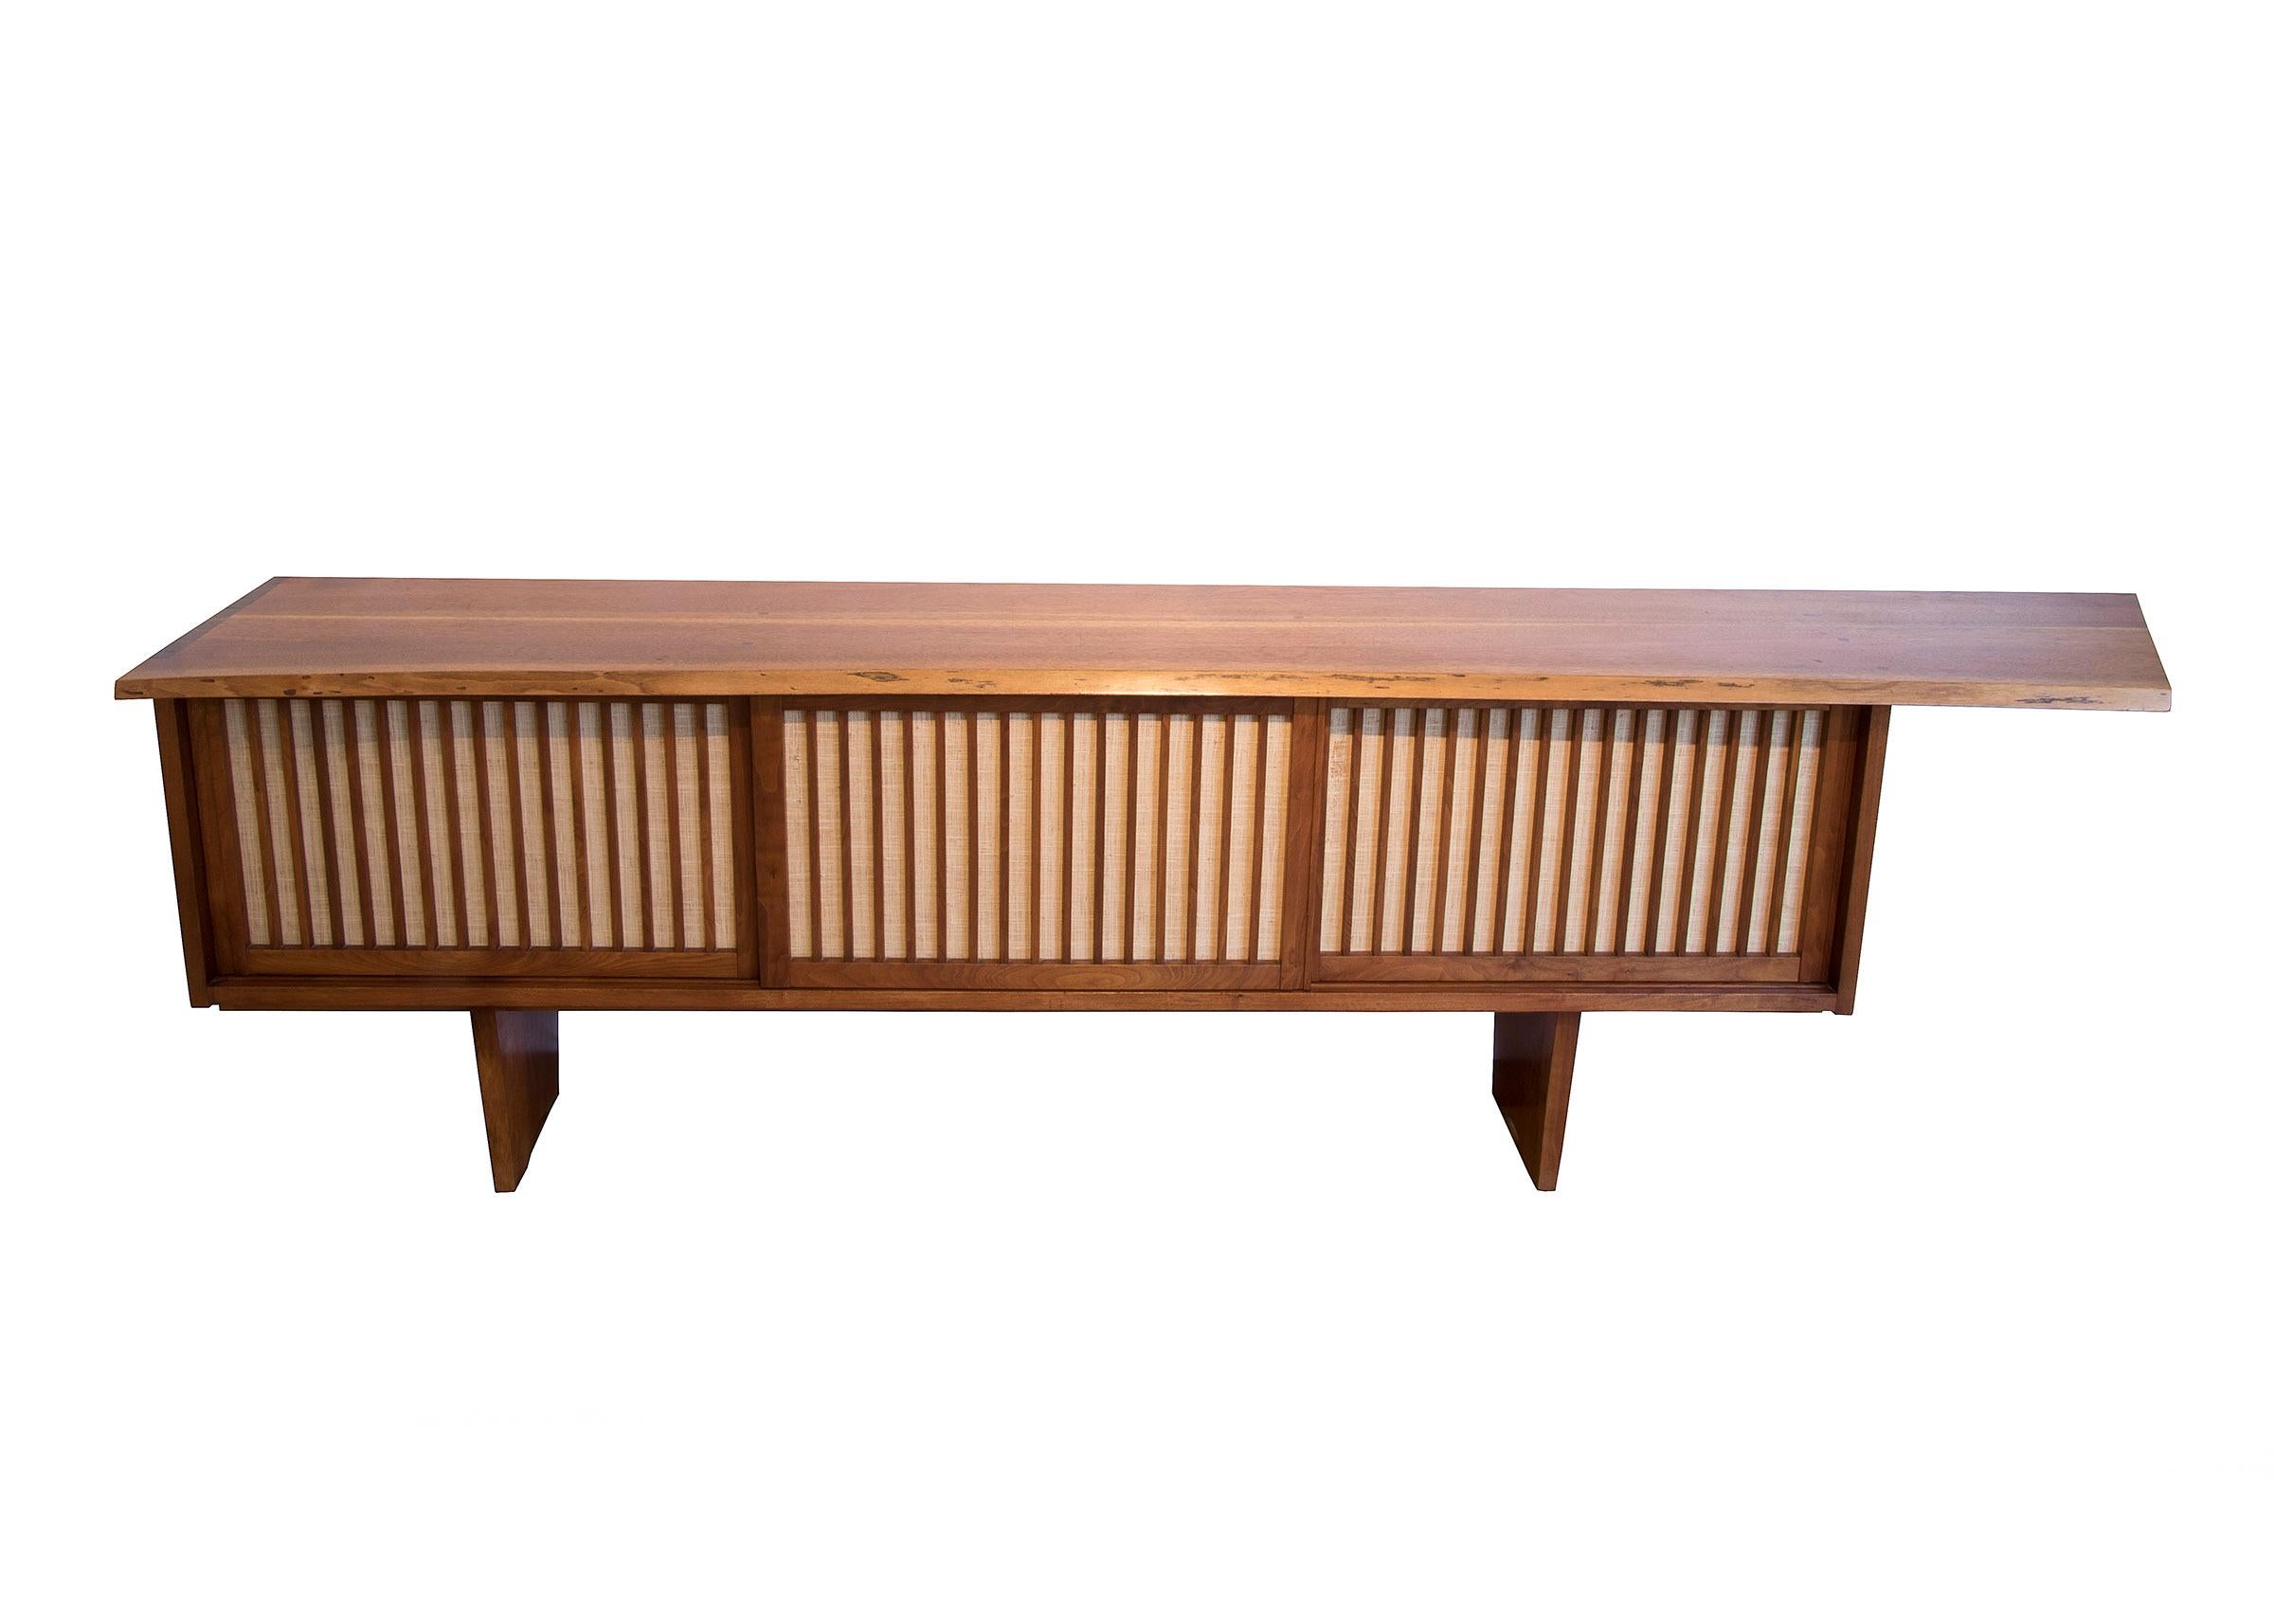 Rochlis Case by George Nakashima, 1966. This credenza (sideboard) is crafted from American Black Walnut and Pandanus (grass cloth) with an overhang and three sliding doors with inside drawers and storage spaces. Concise dovetail wood-joints bond the